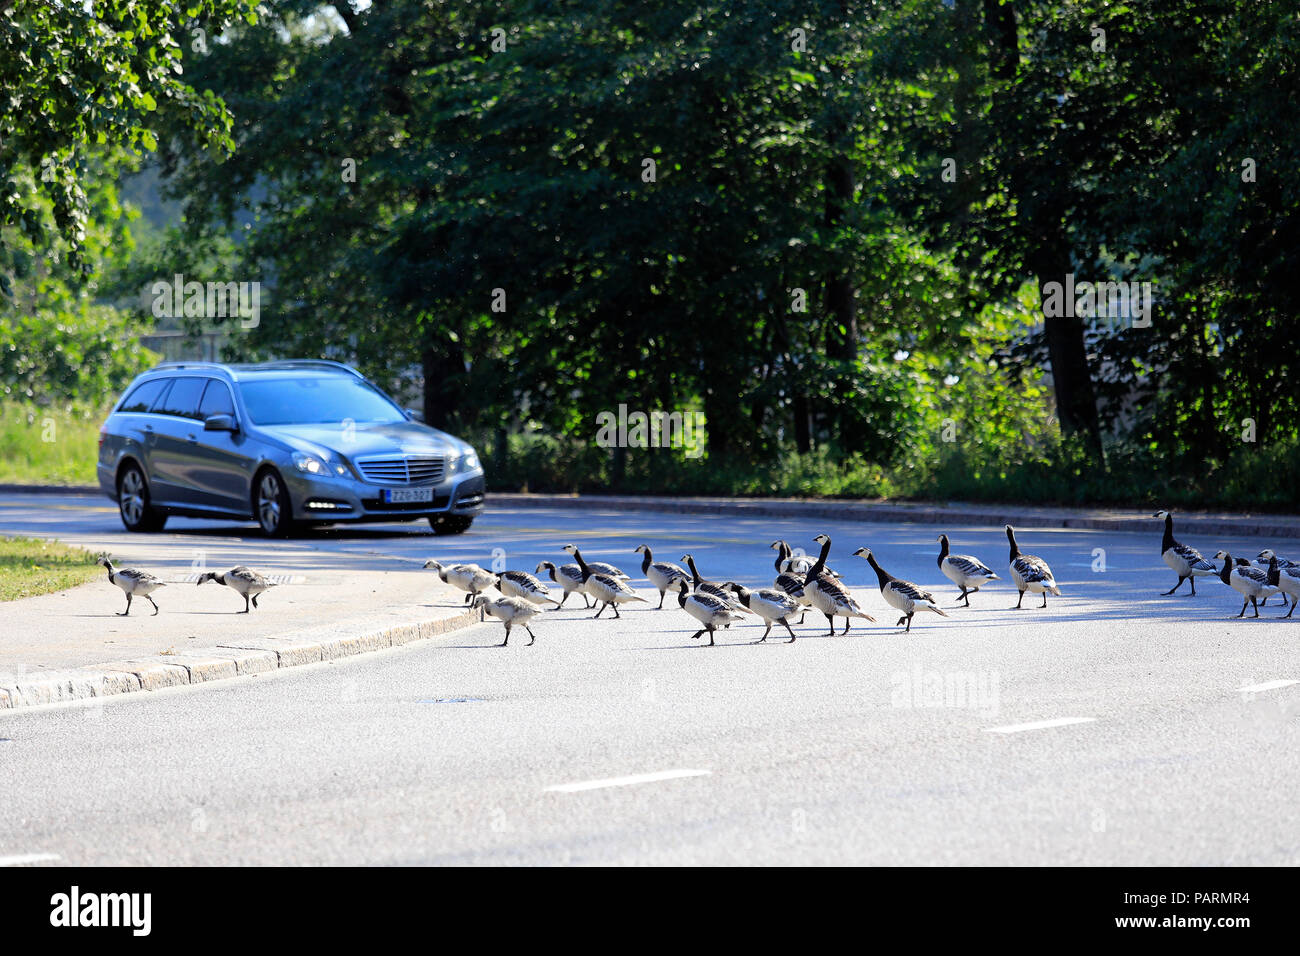 Driver stops and sees that flock of Barnacle geese, Branta leucopsis, cross the street safely. Helsinki, Finland - July 16, 2018. Stock Photo